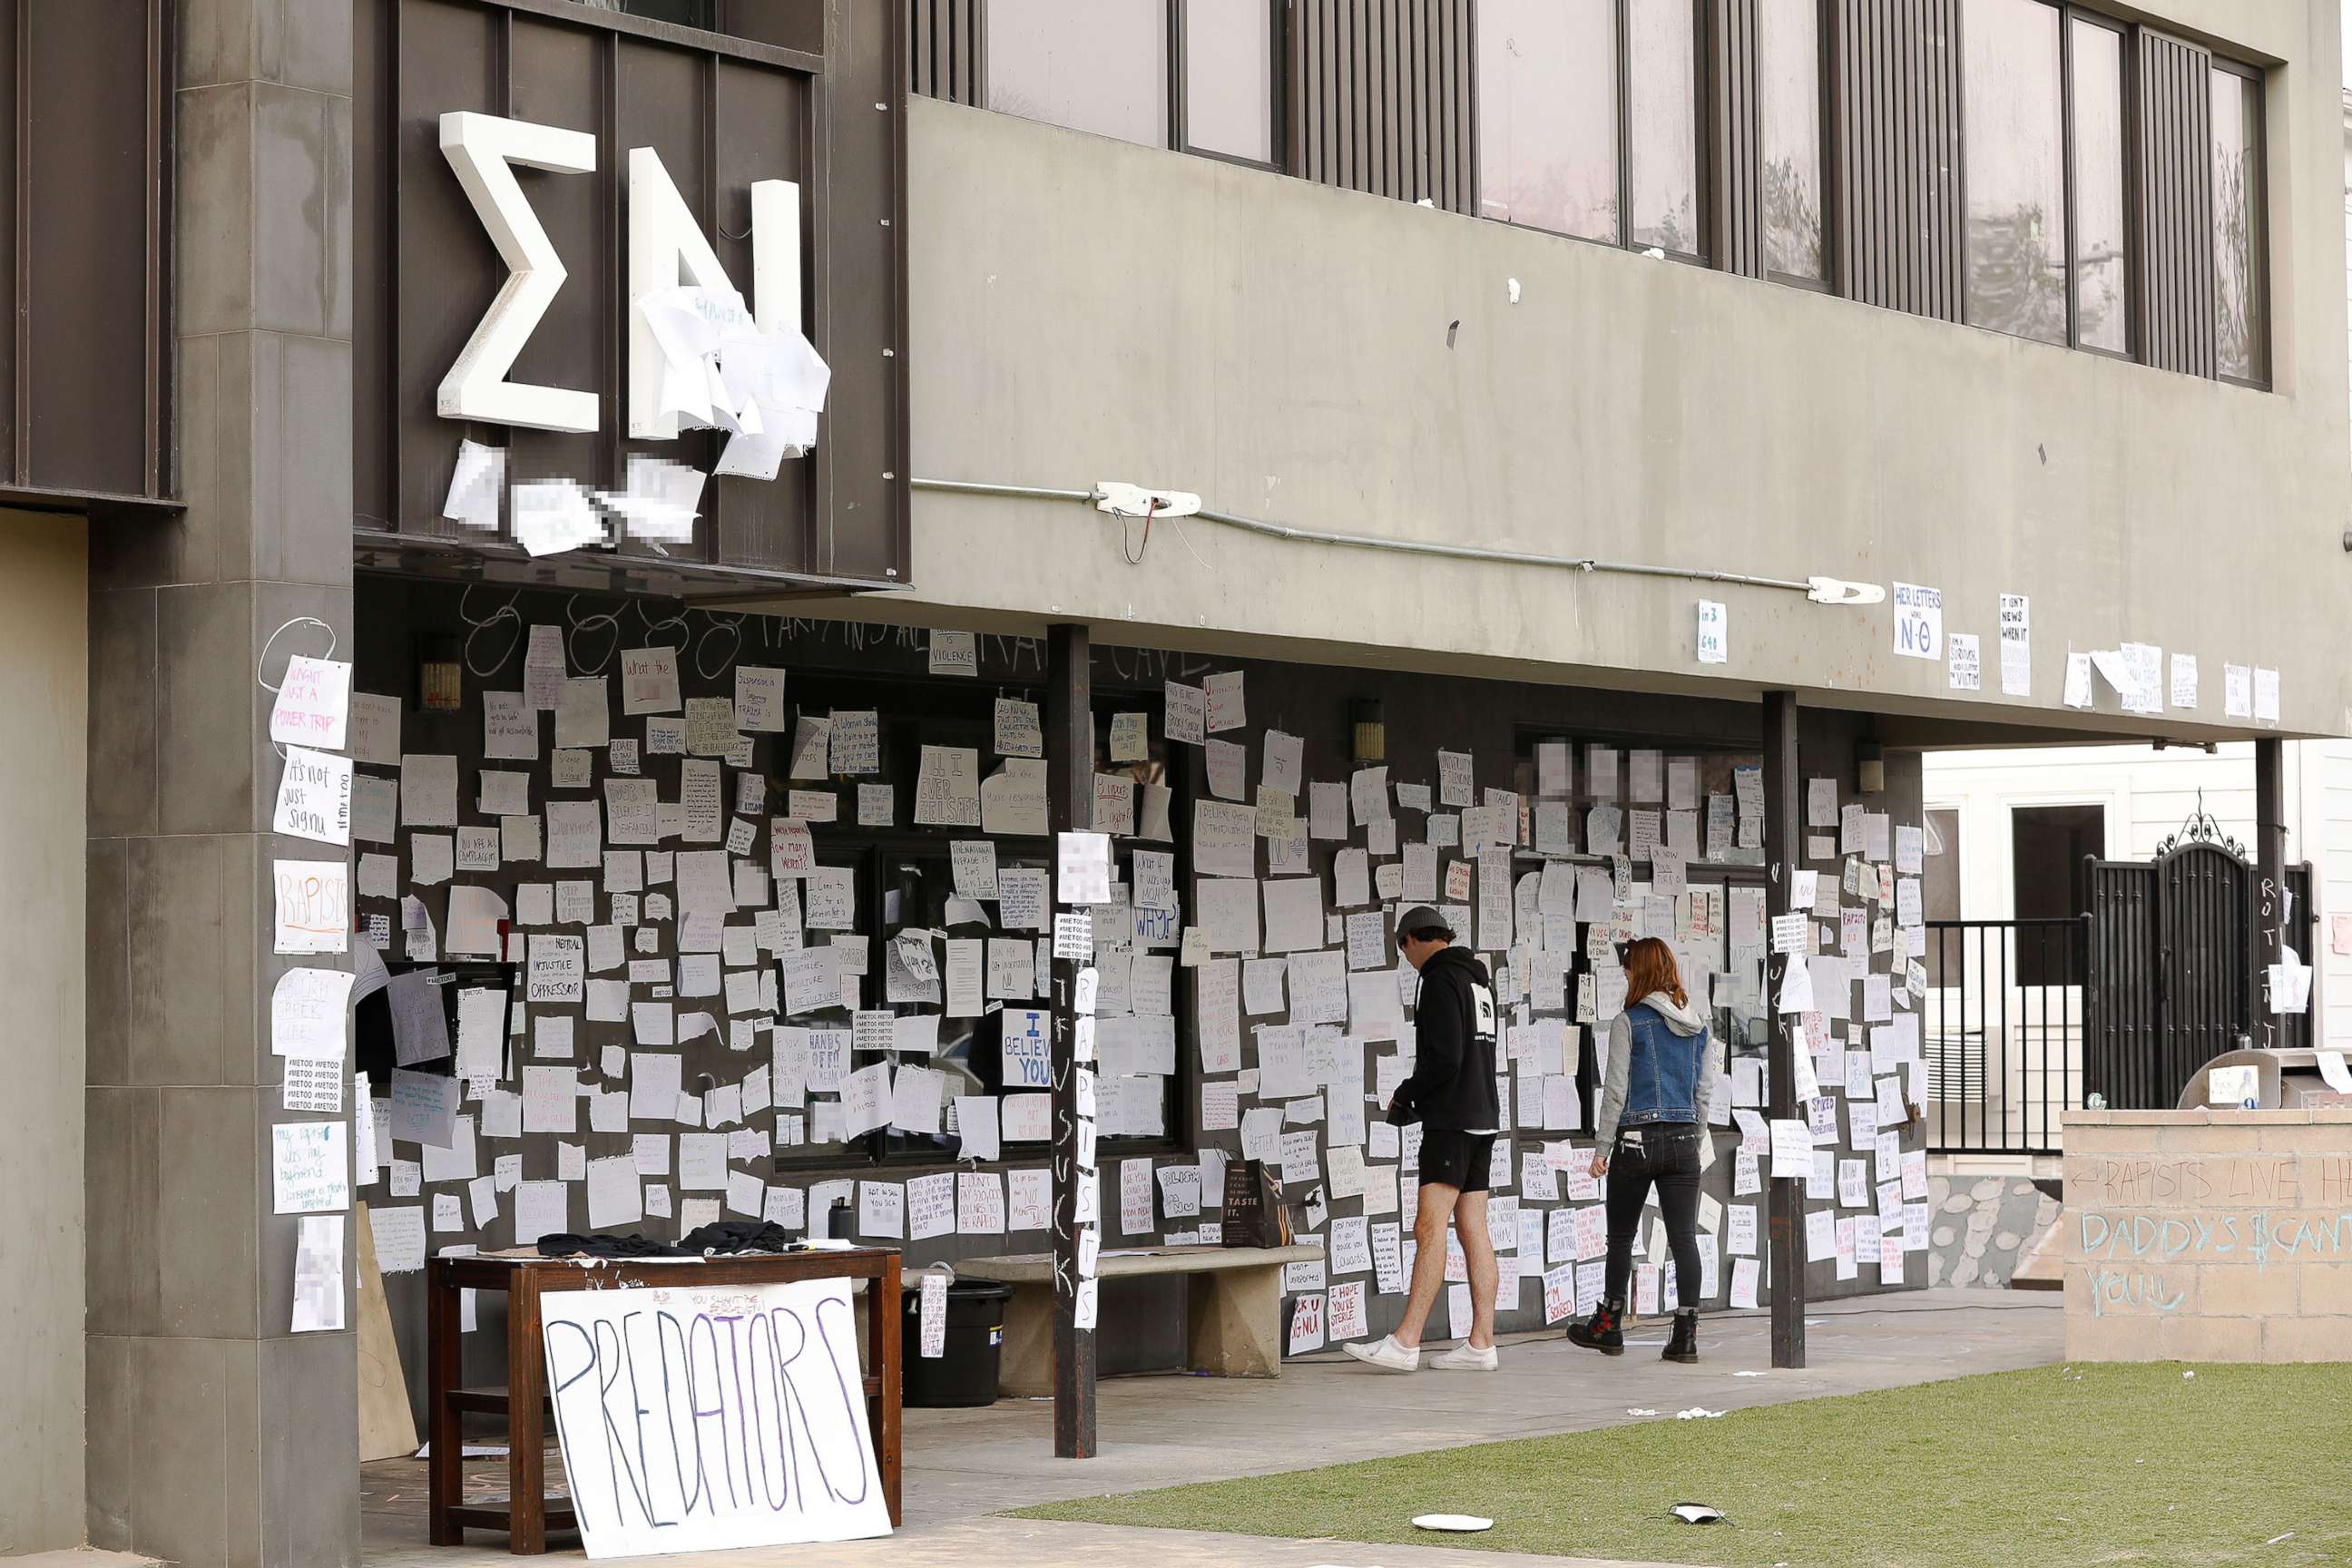 PHOTO: USC sophomore students Claire Smerdon and Charlie Littleworth re-tape notes attached to the Sigma Nu fraternity house near the USC campus, Oct. 22, 2021, in Los Angeles.